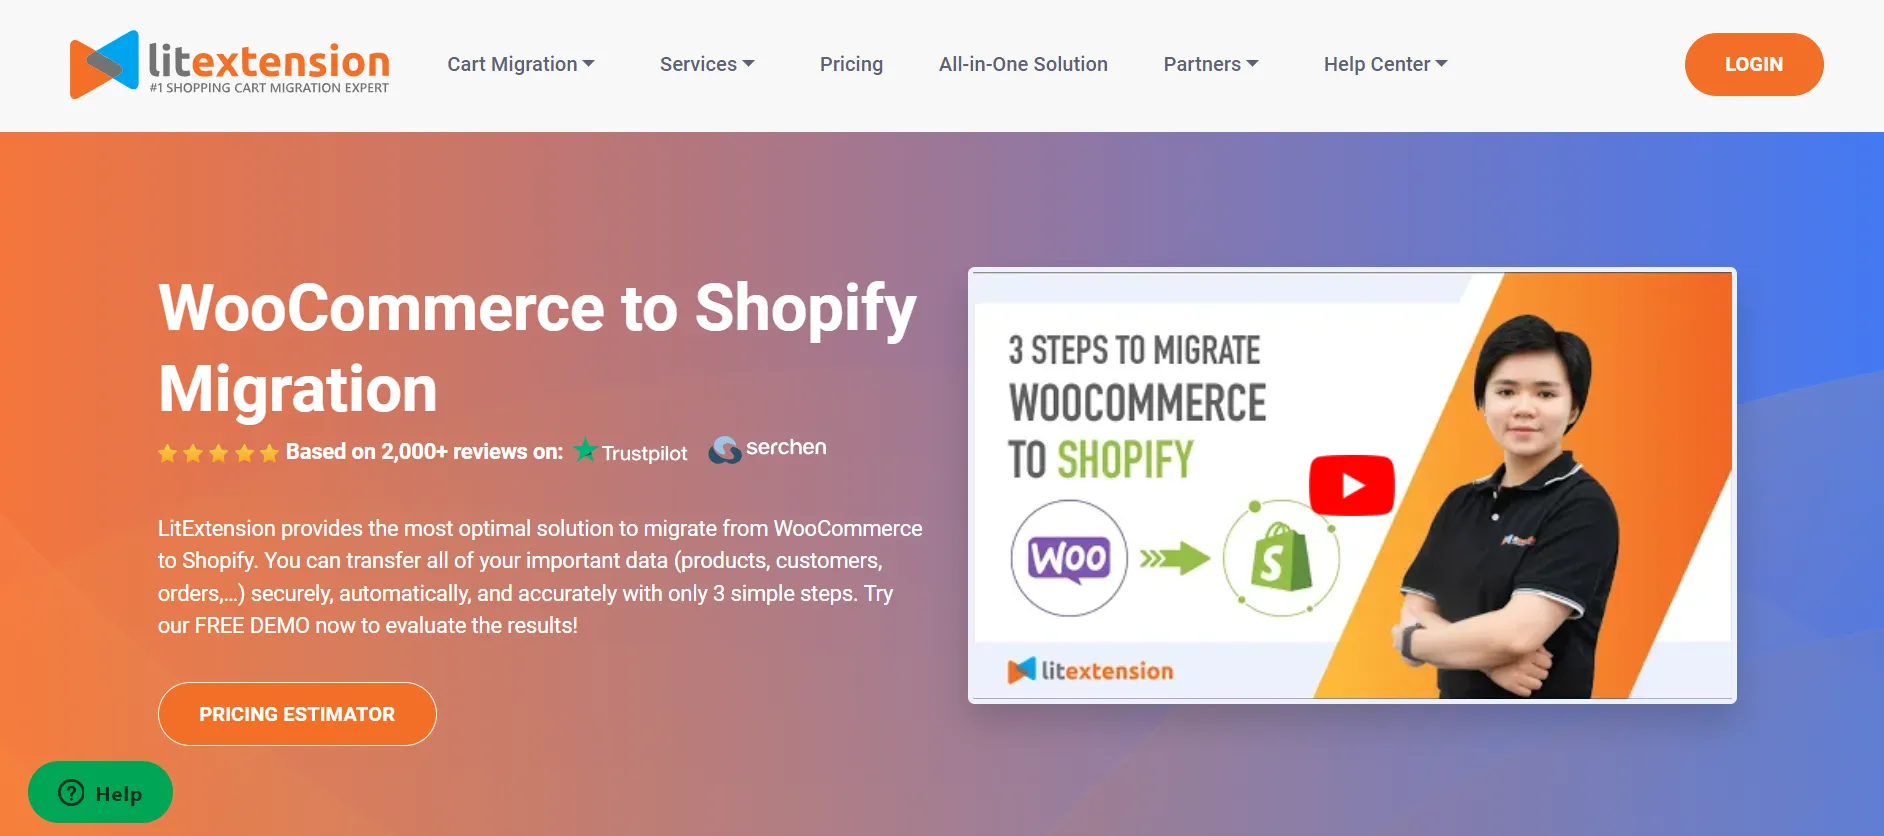 LitExtension WooCommerce to Shopify migration